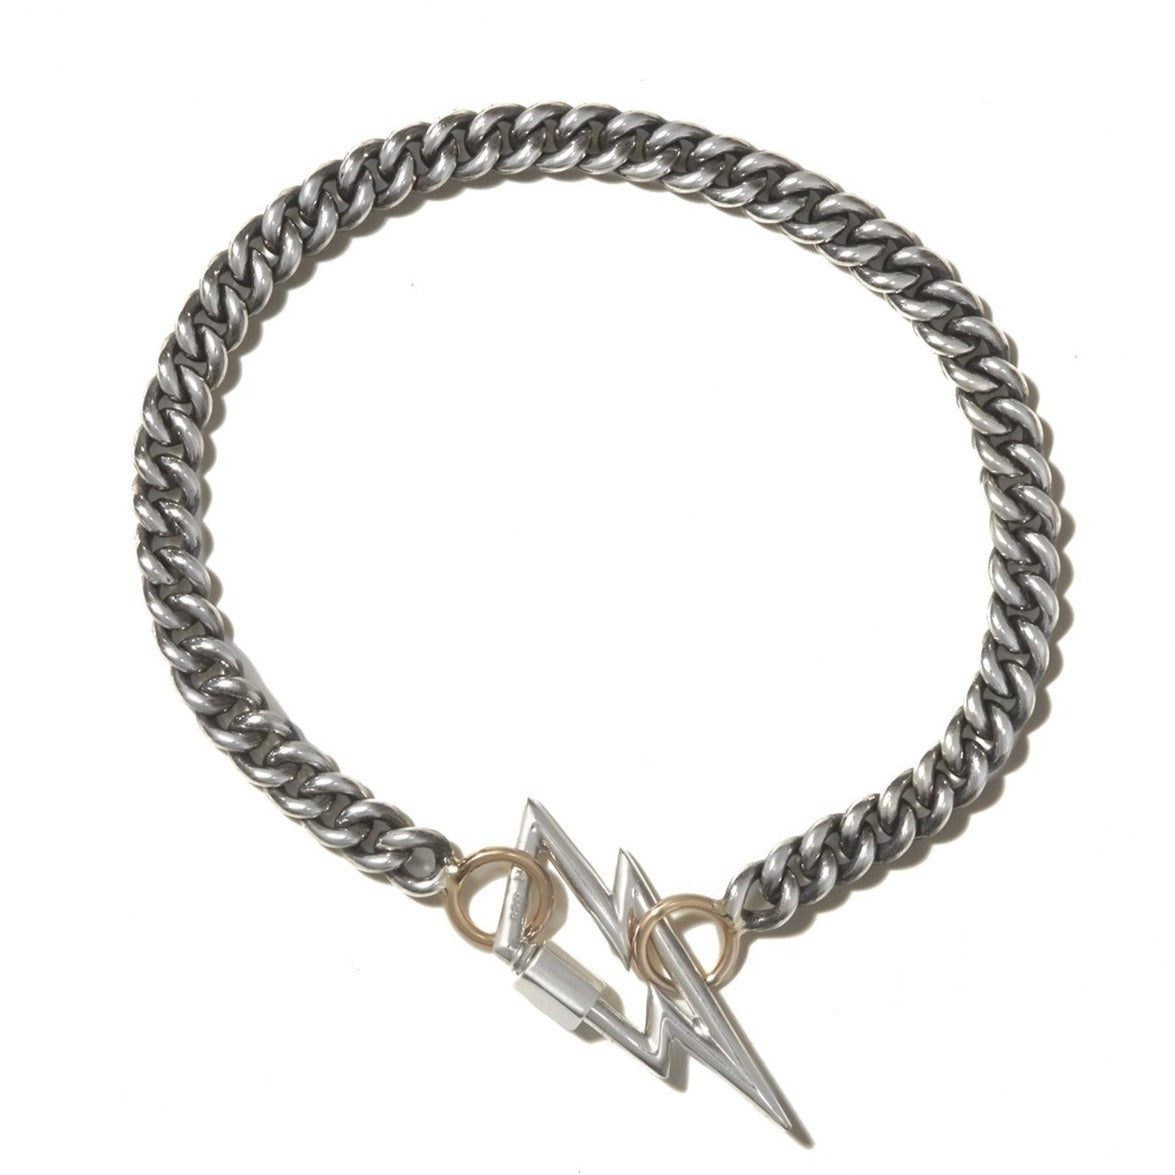 Sterling silver heavy chain bracelet with lightning bolt charm